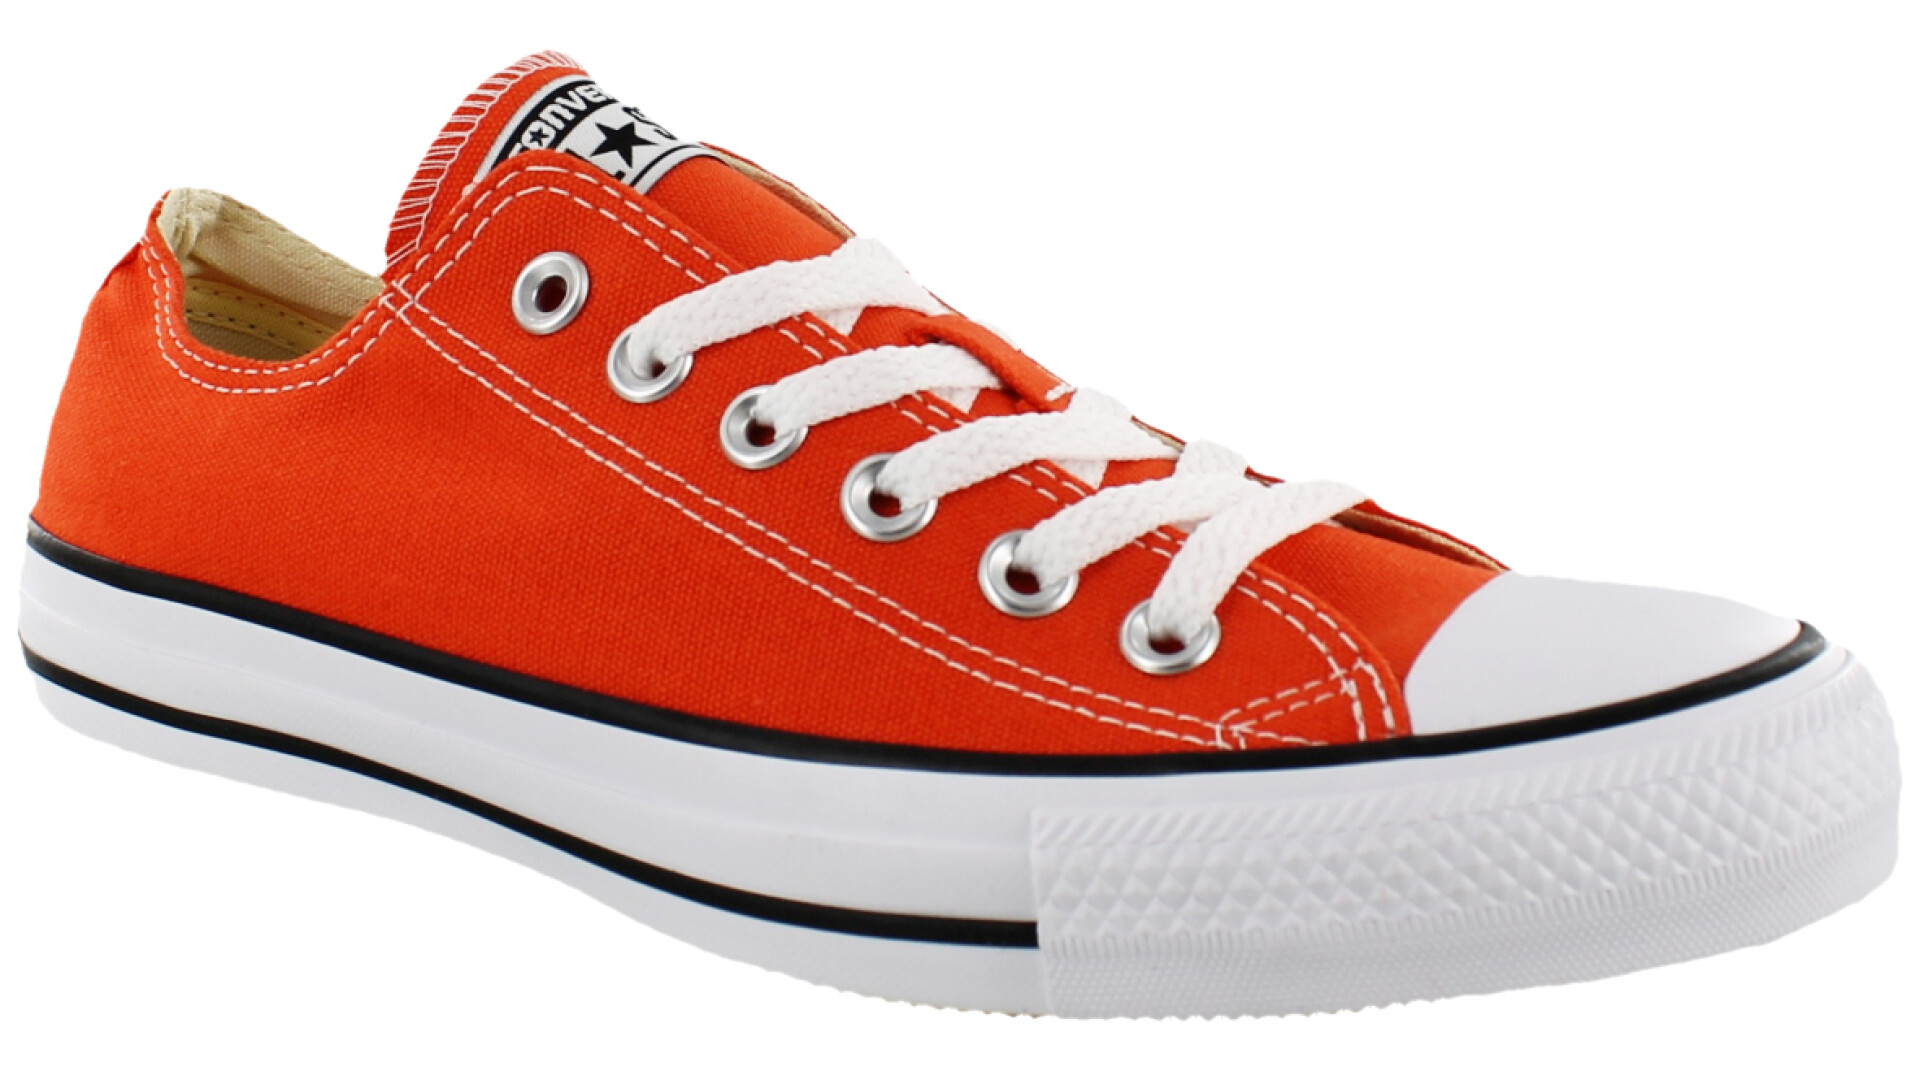 Classic - Basket Low Converse - All Star - Fuego 